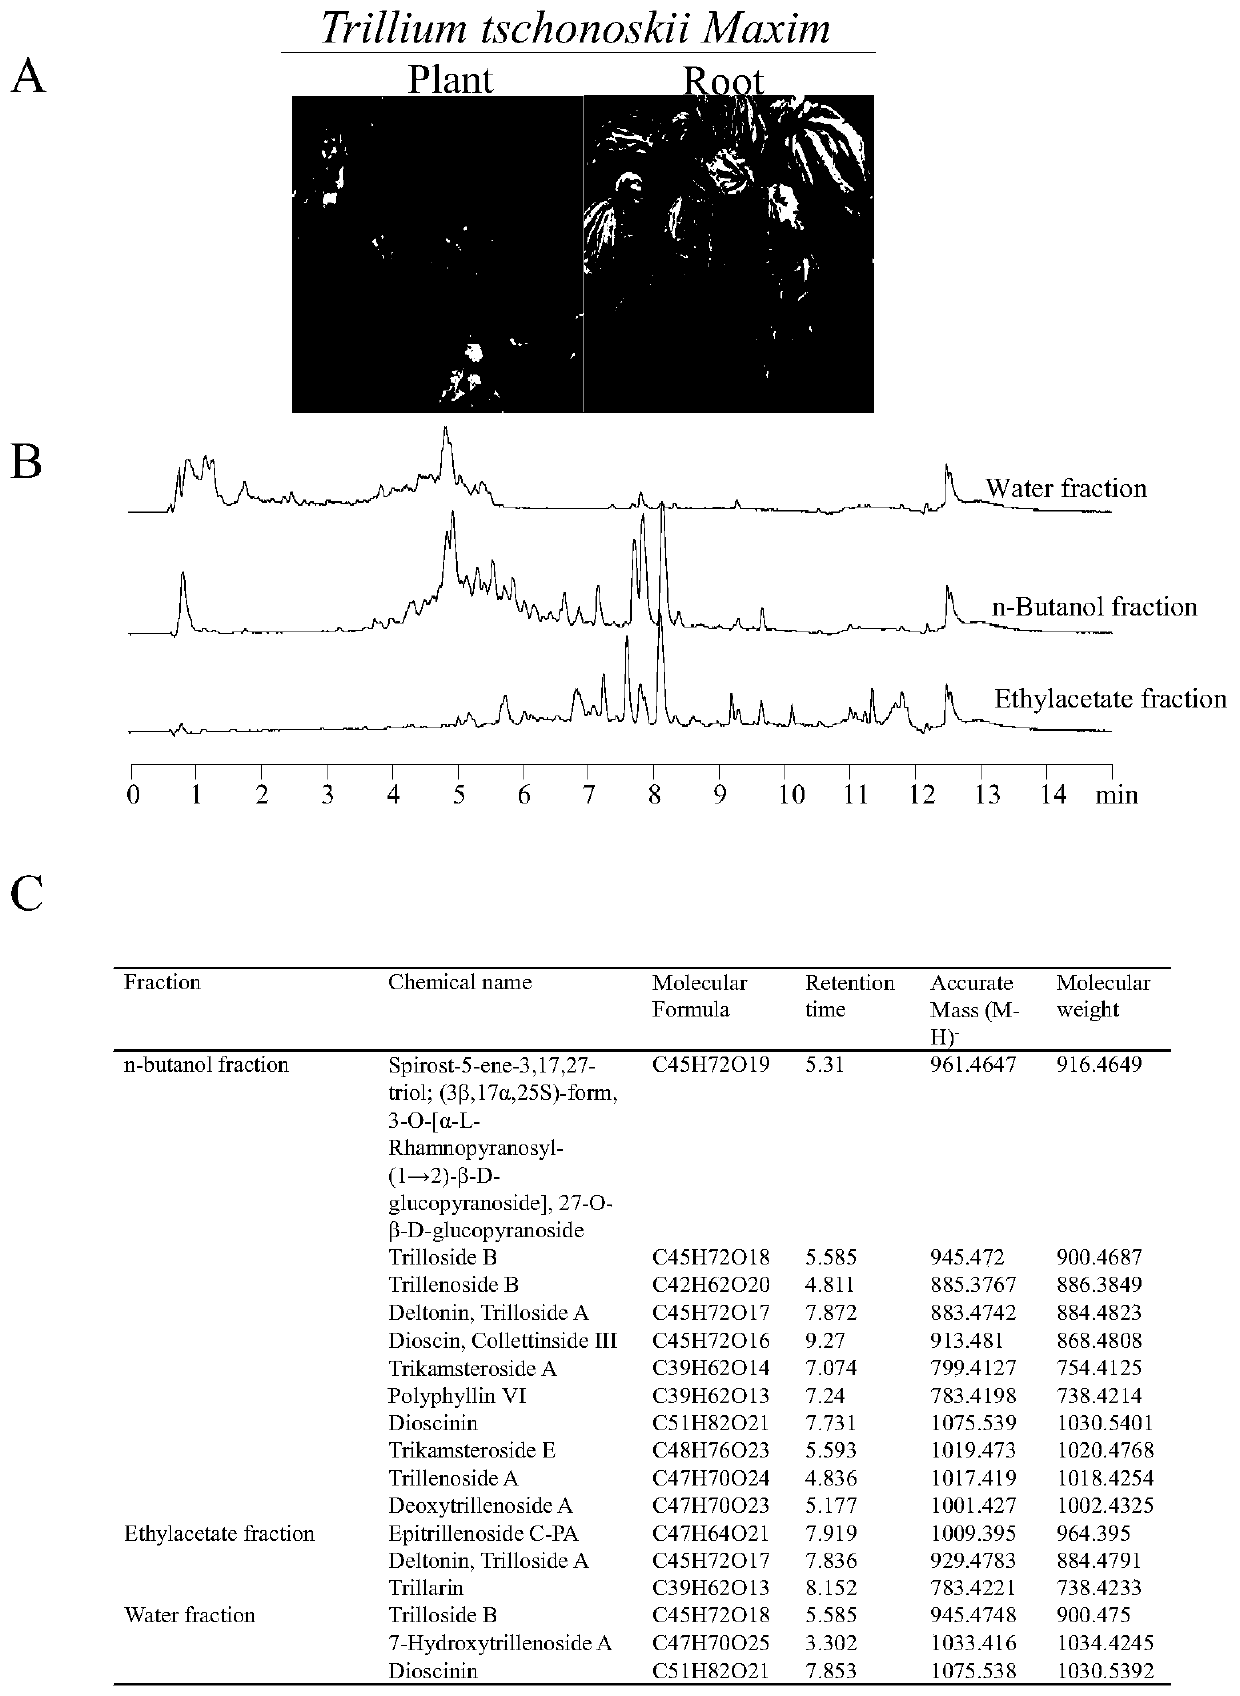 Application of trillium tschonoskii maxim saponin to preparation of medicines for protecting nerves